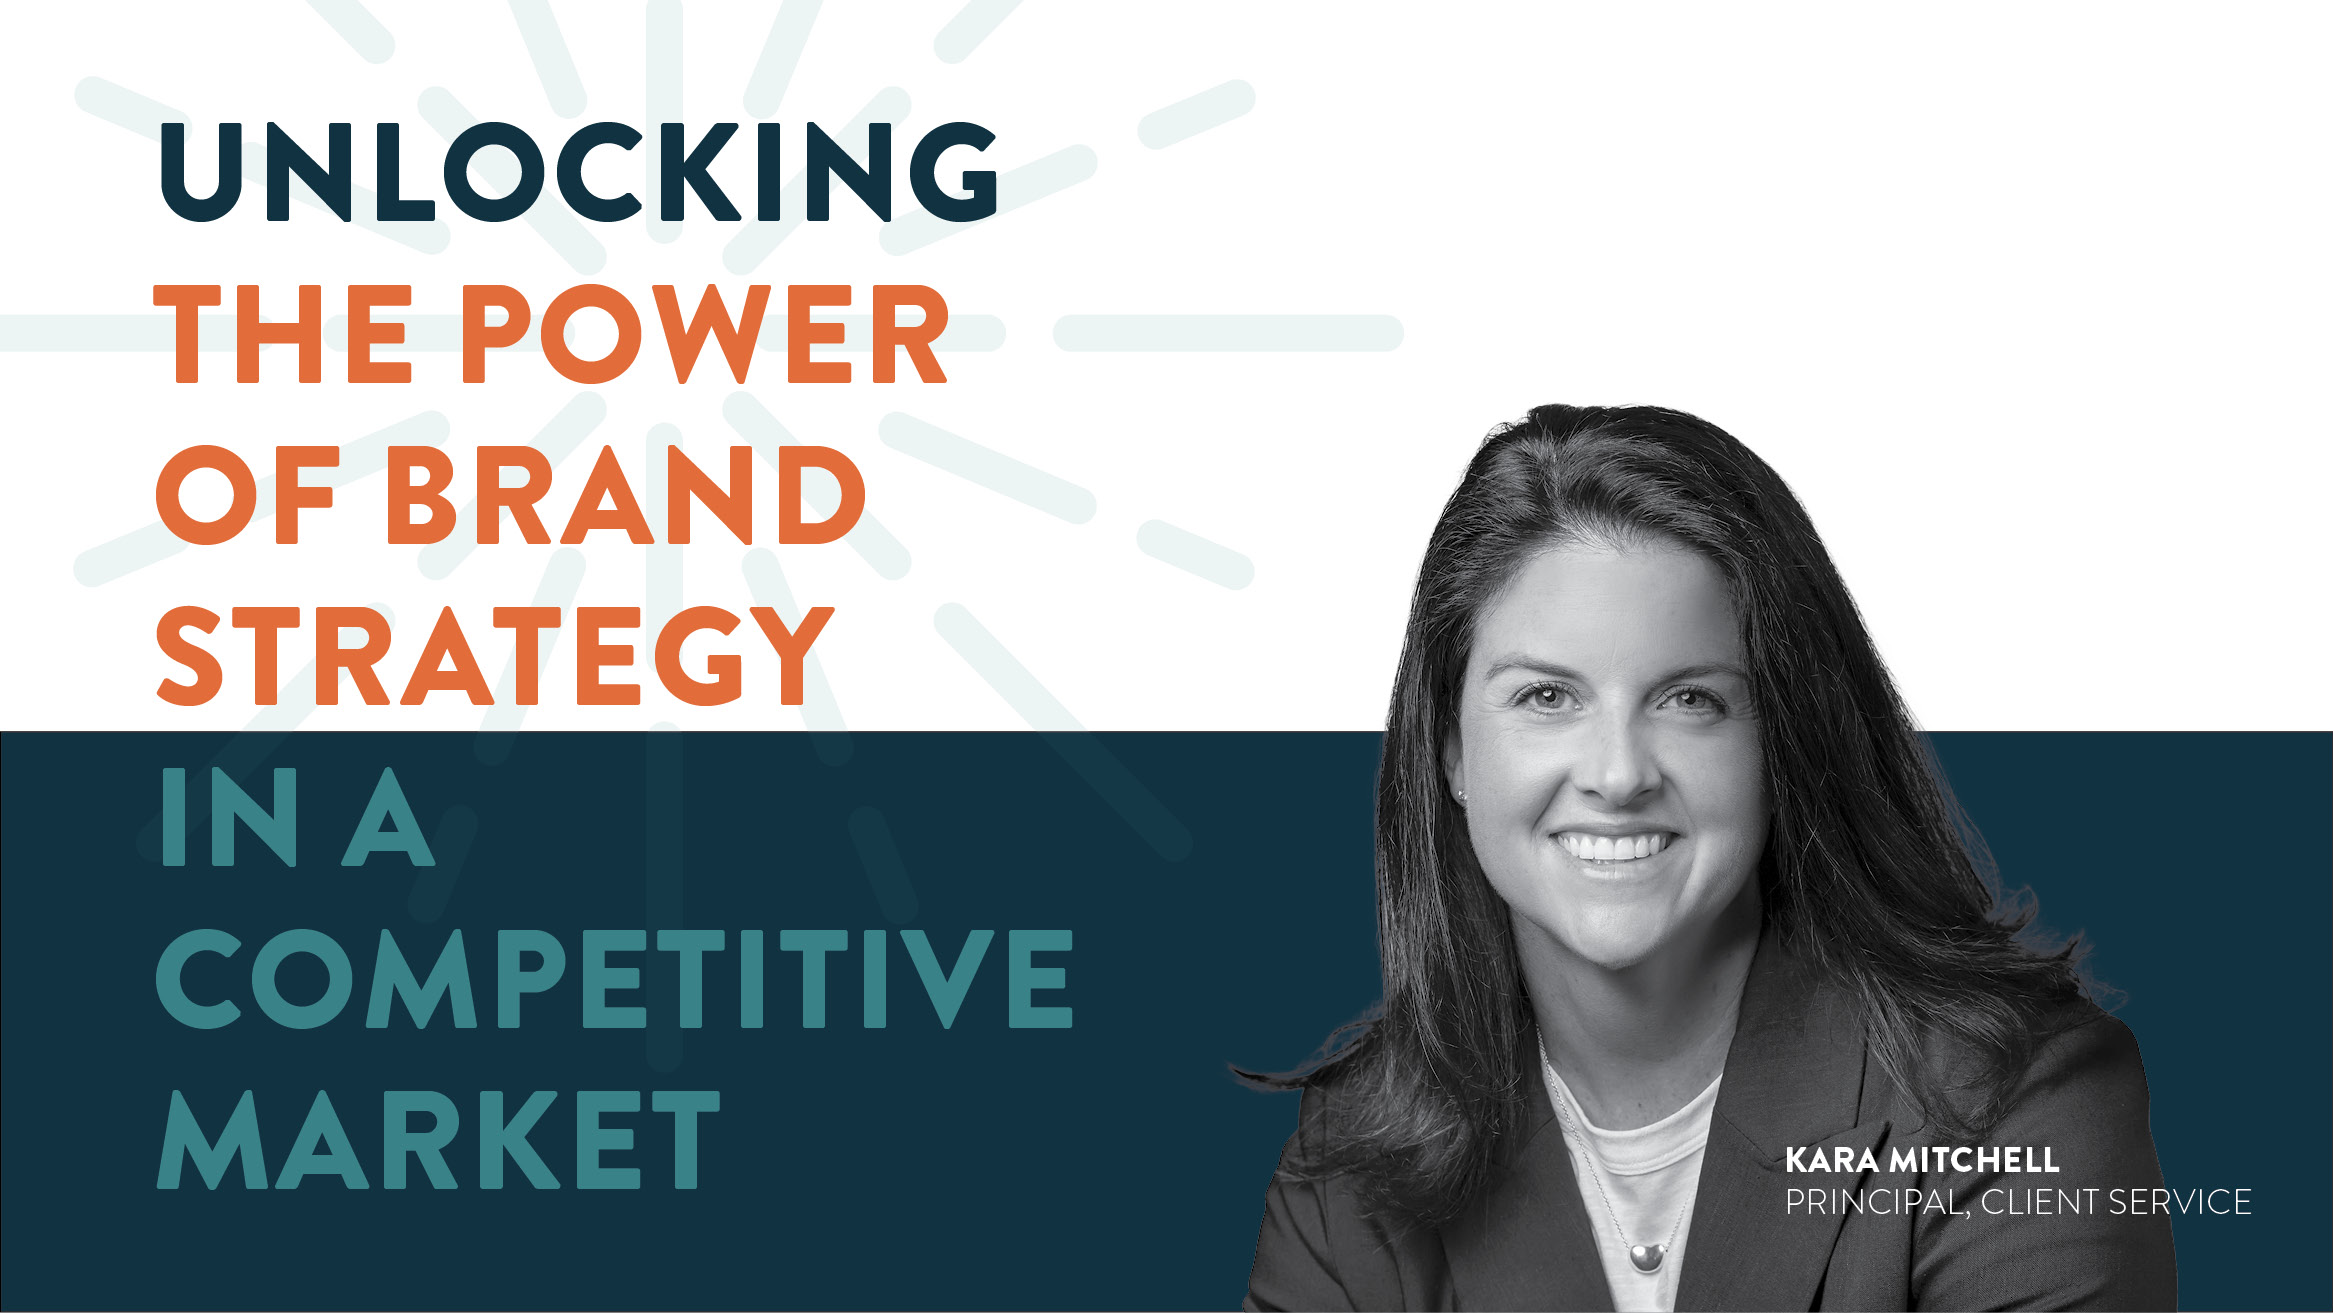 headshot of Kara Mitchell with the text Unlocking the power of brand strategy in a competitive market